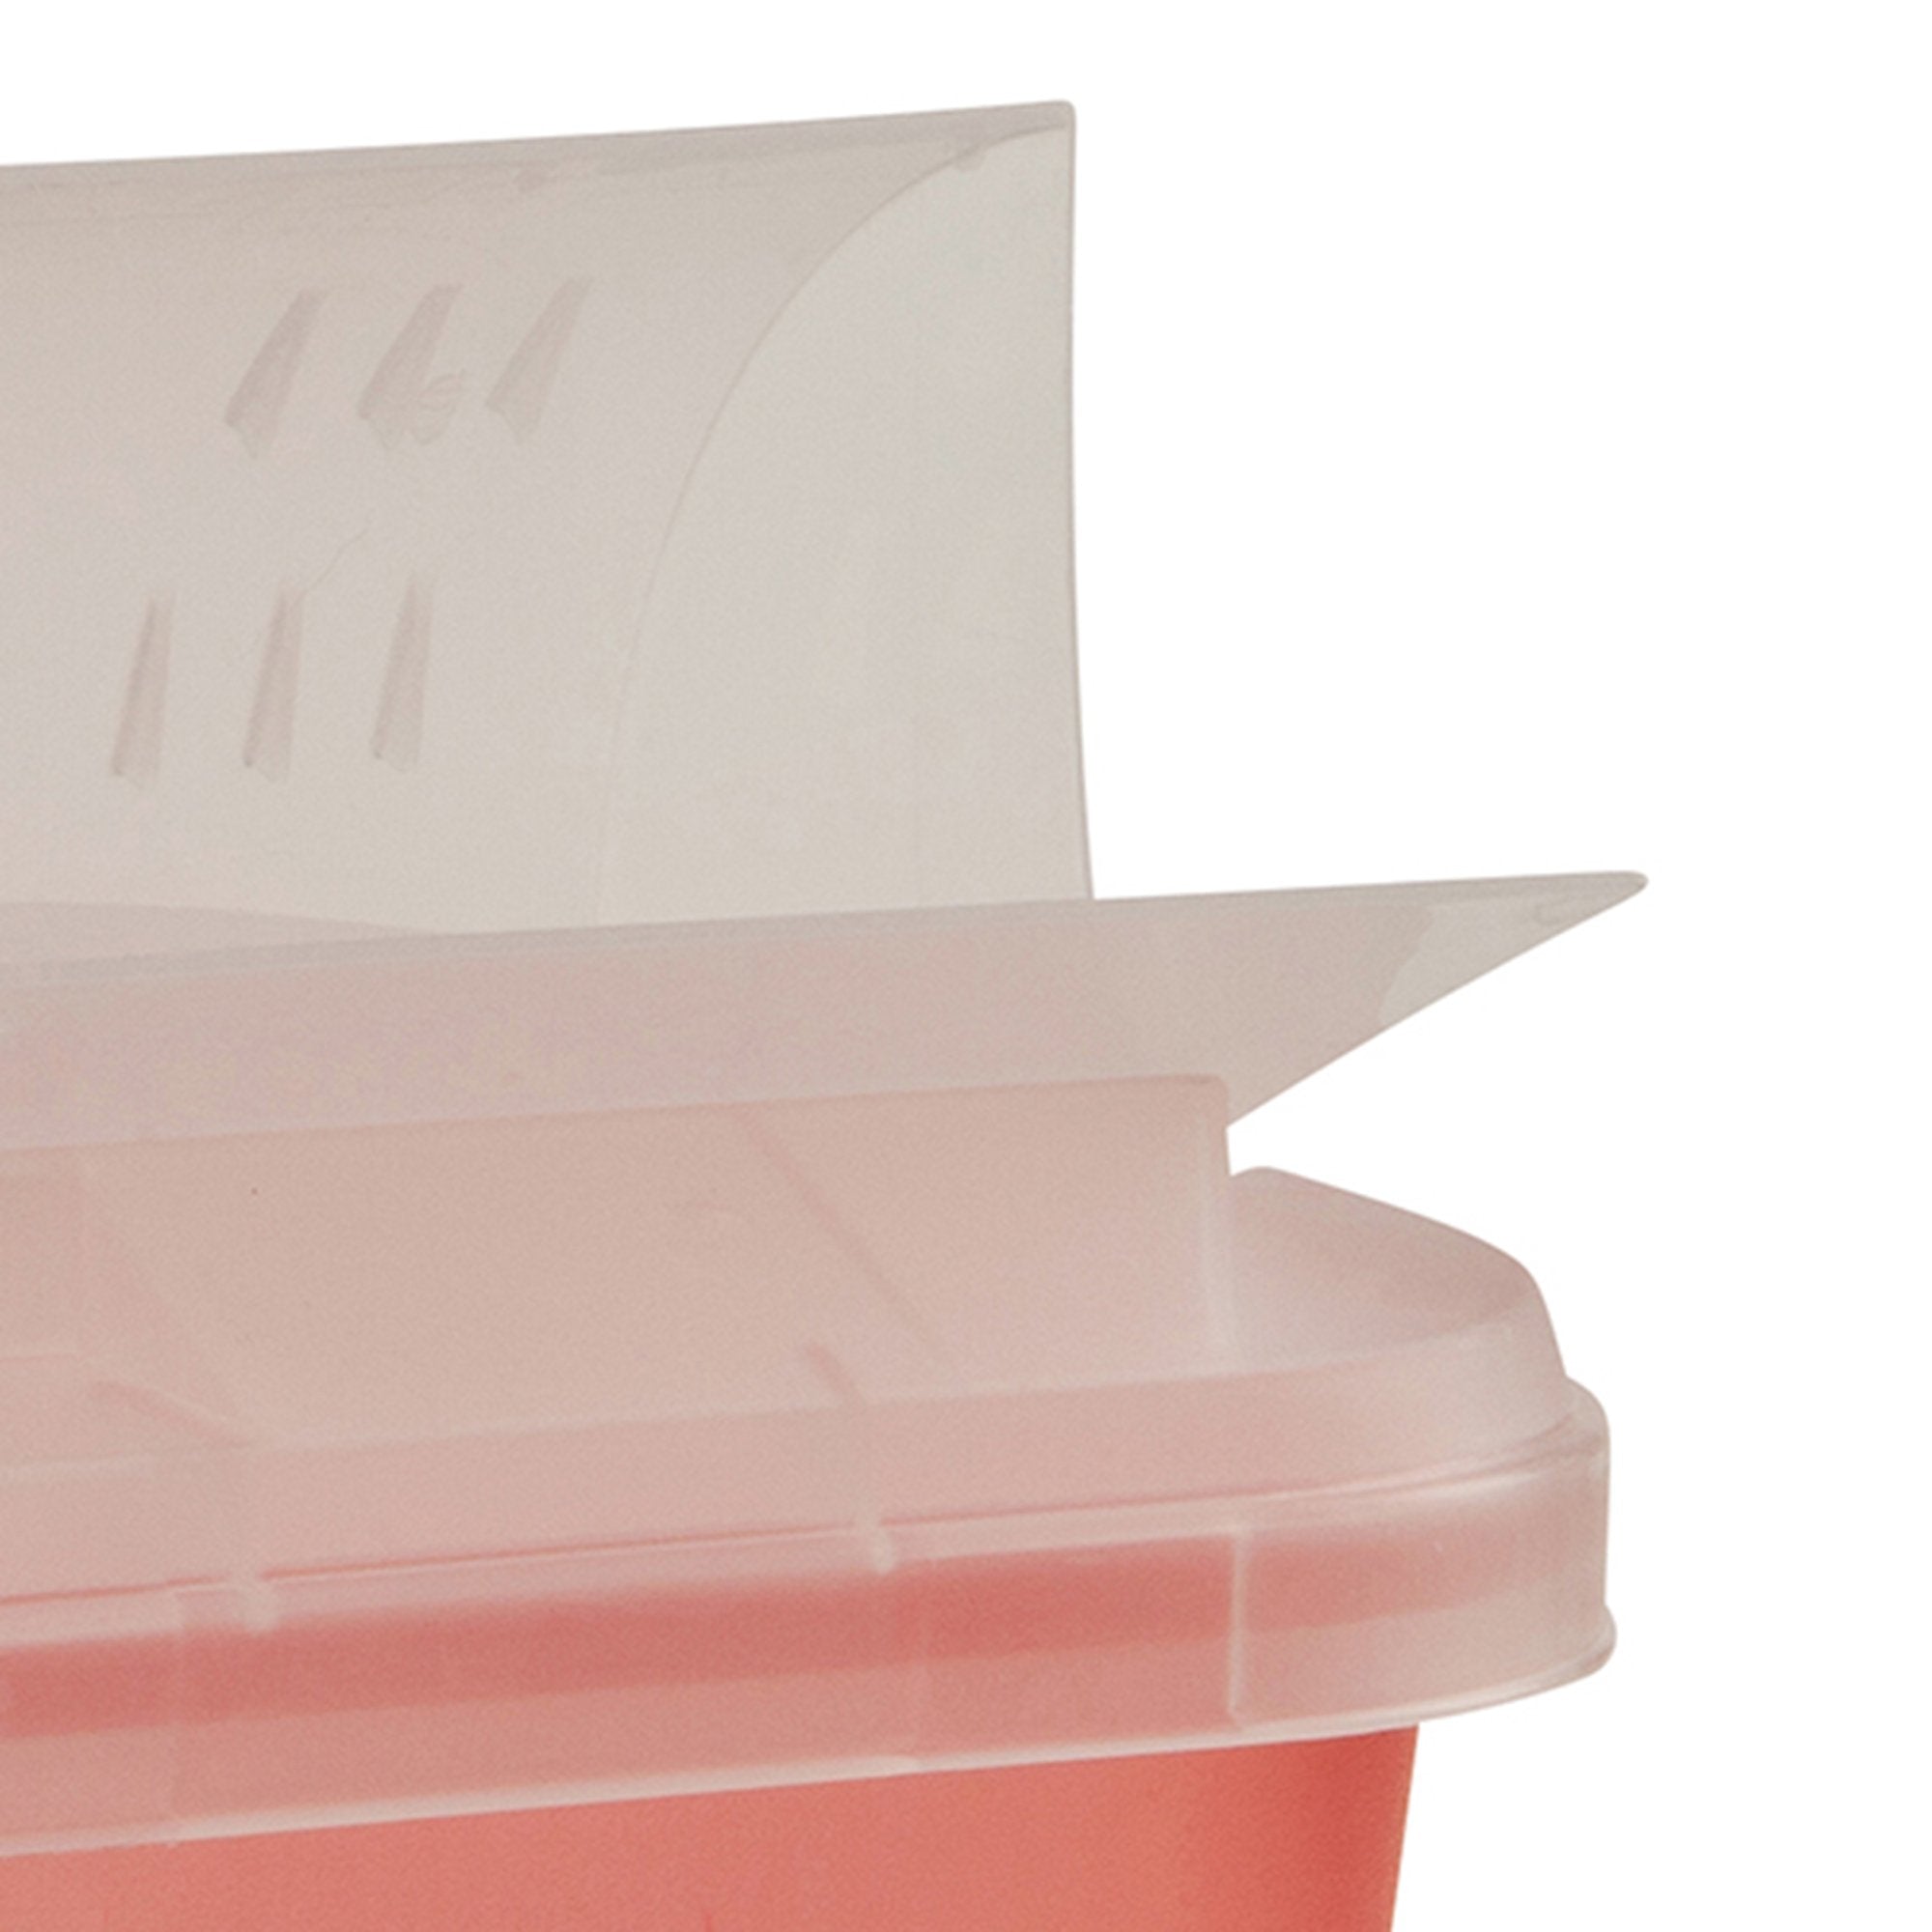 Sharps Container SharpSafety™ Translucent Red Base 10 H X 10-1/2 W X 7-1/4 D Inch Horizontal Entry 2 Gallon